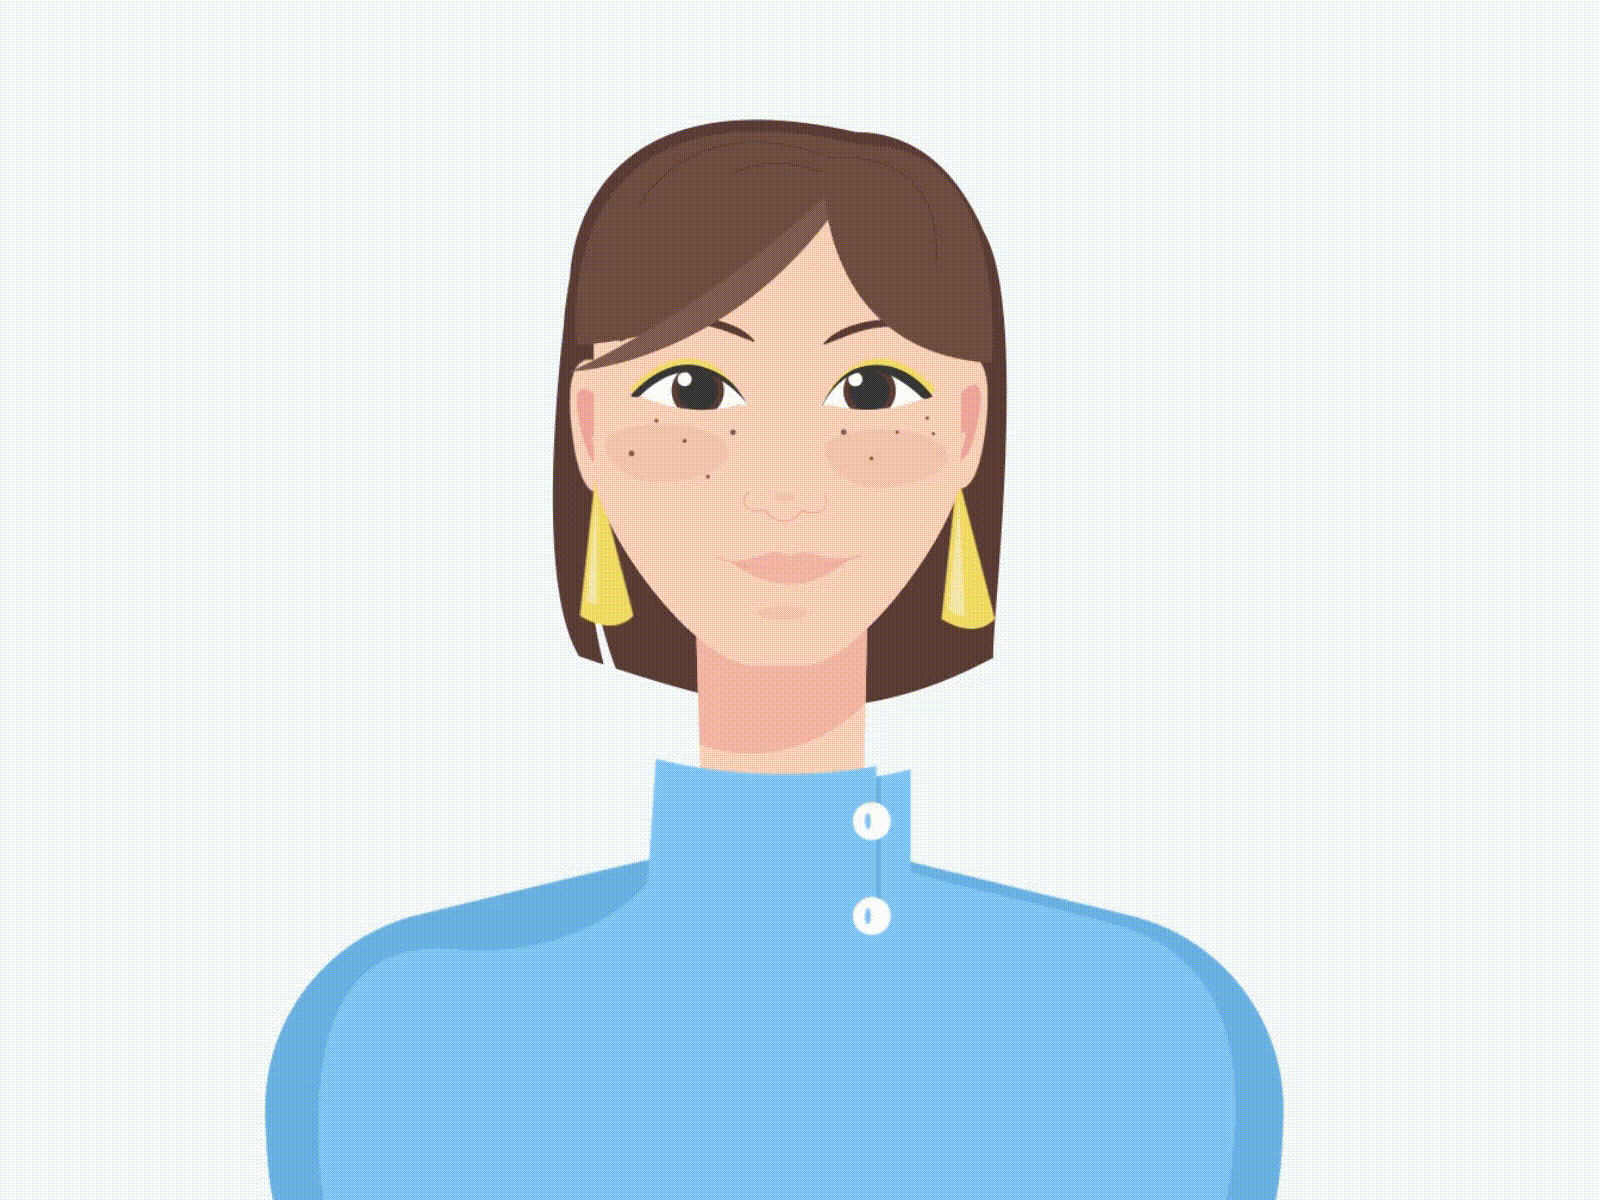 Girl in blue characteranimation charcter design facerig headrig illustration wowhowstudio